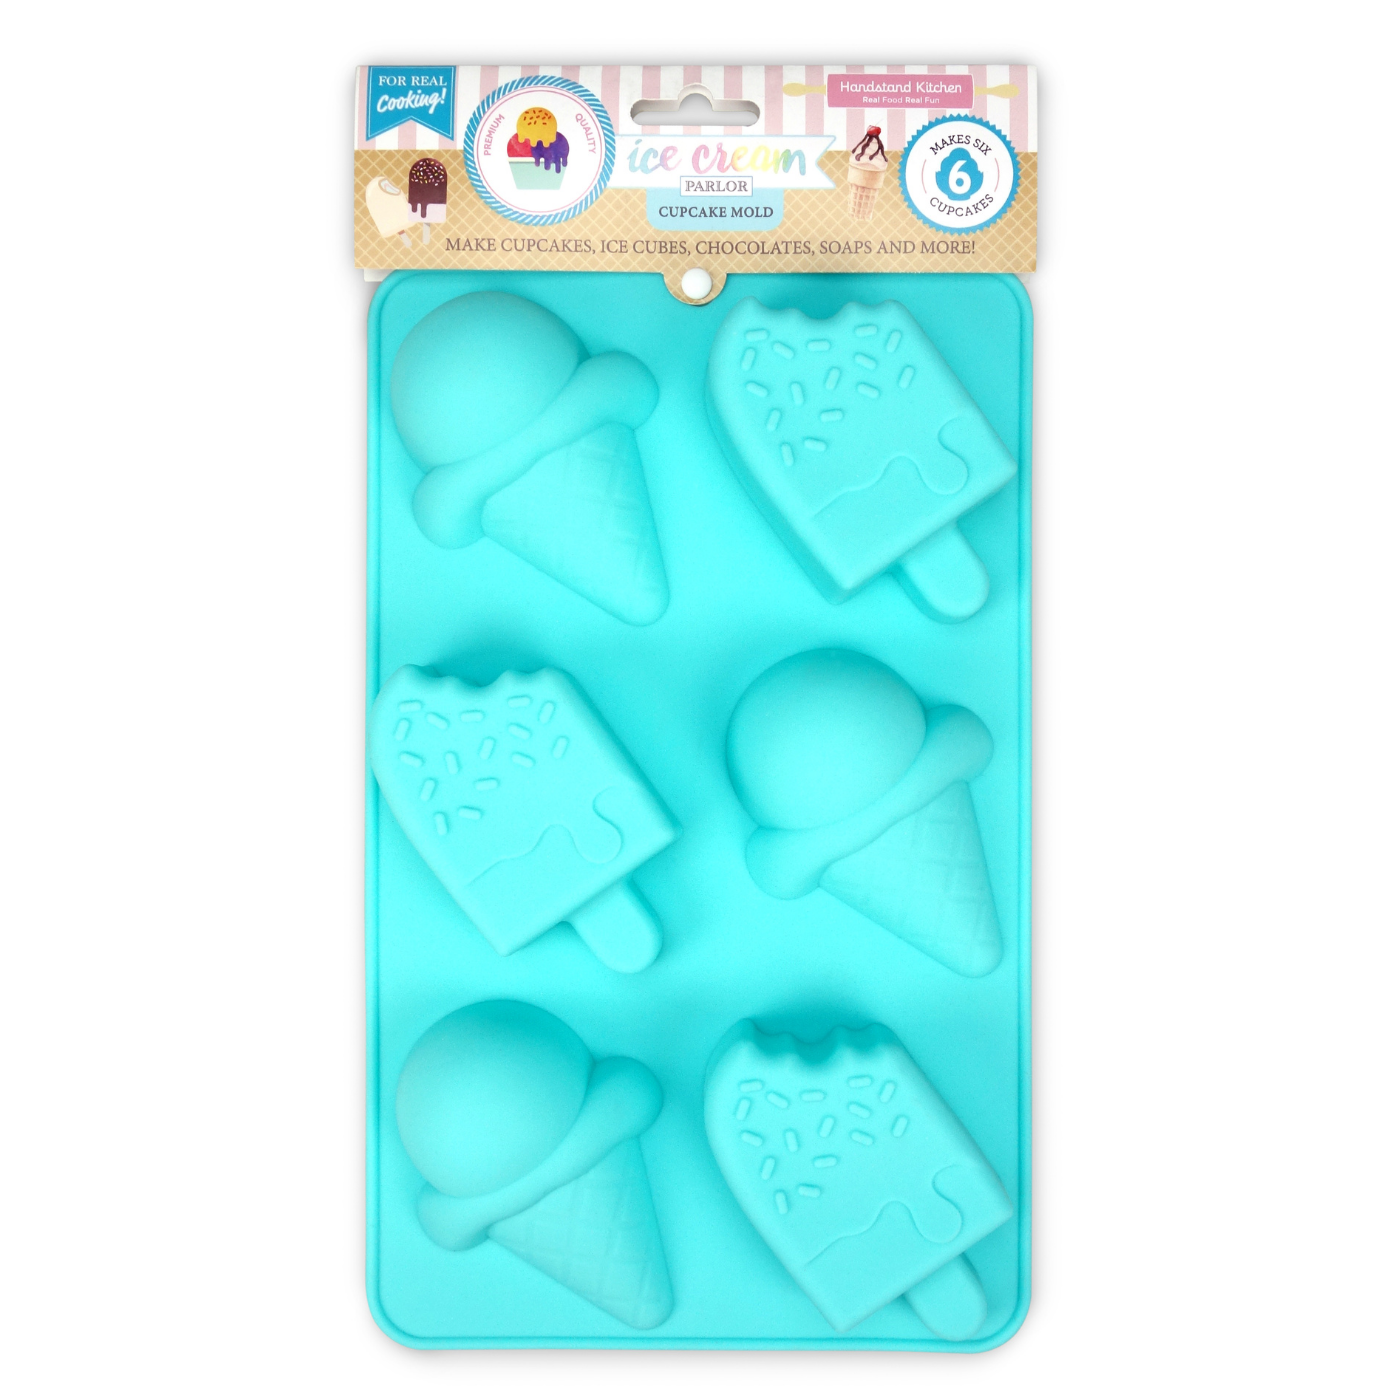 Sohindel Food Grade Silicone Ice Cube Mold Square Ice Cube Ice Cream Maker Kitchen Bar Drinking Accessories - Blue